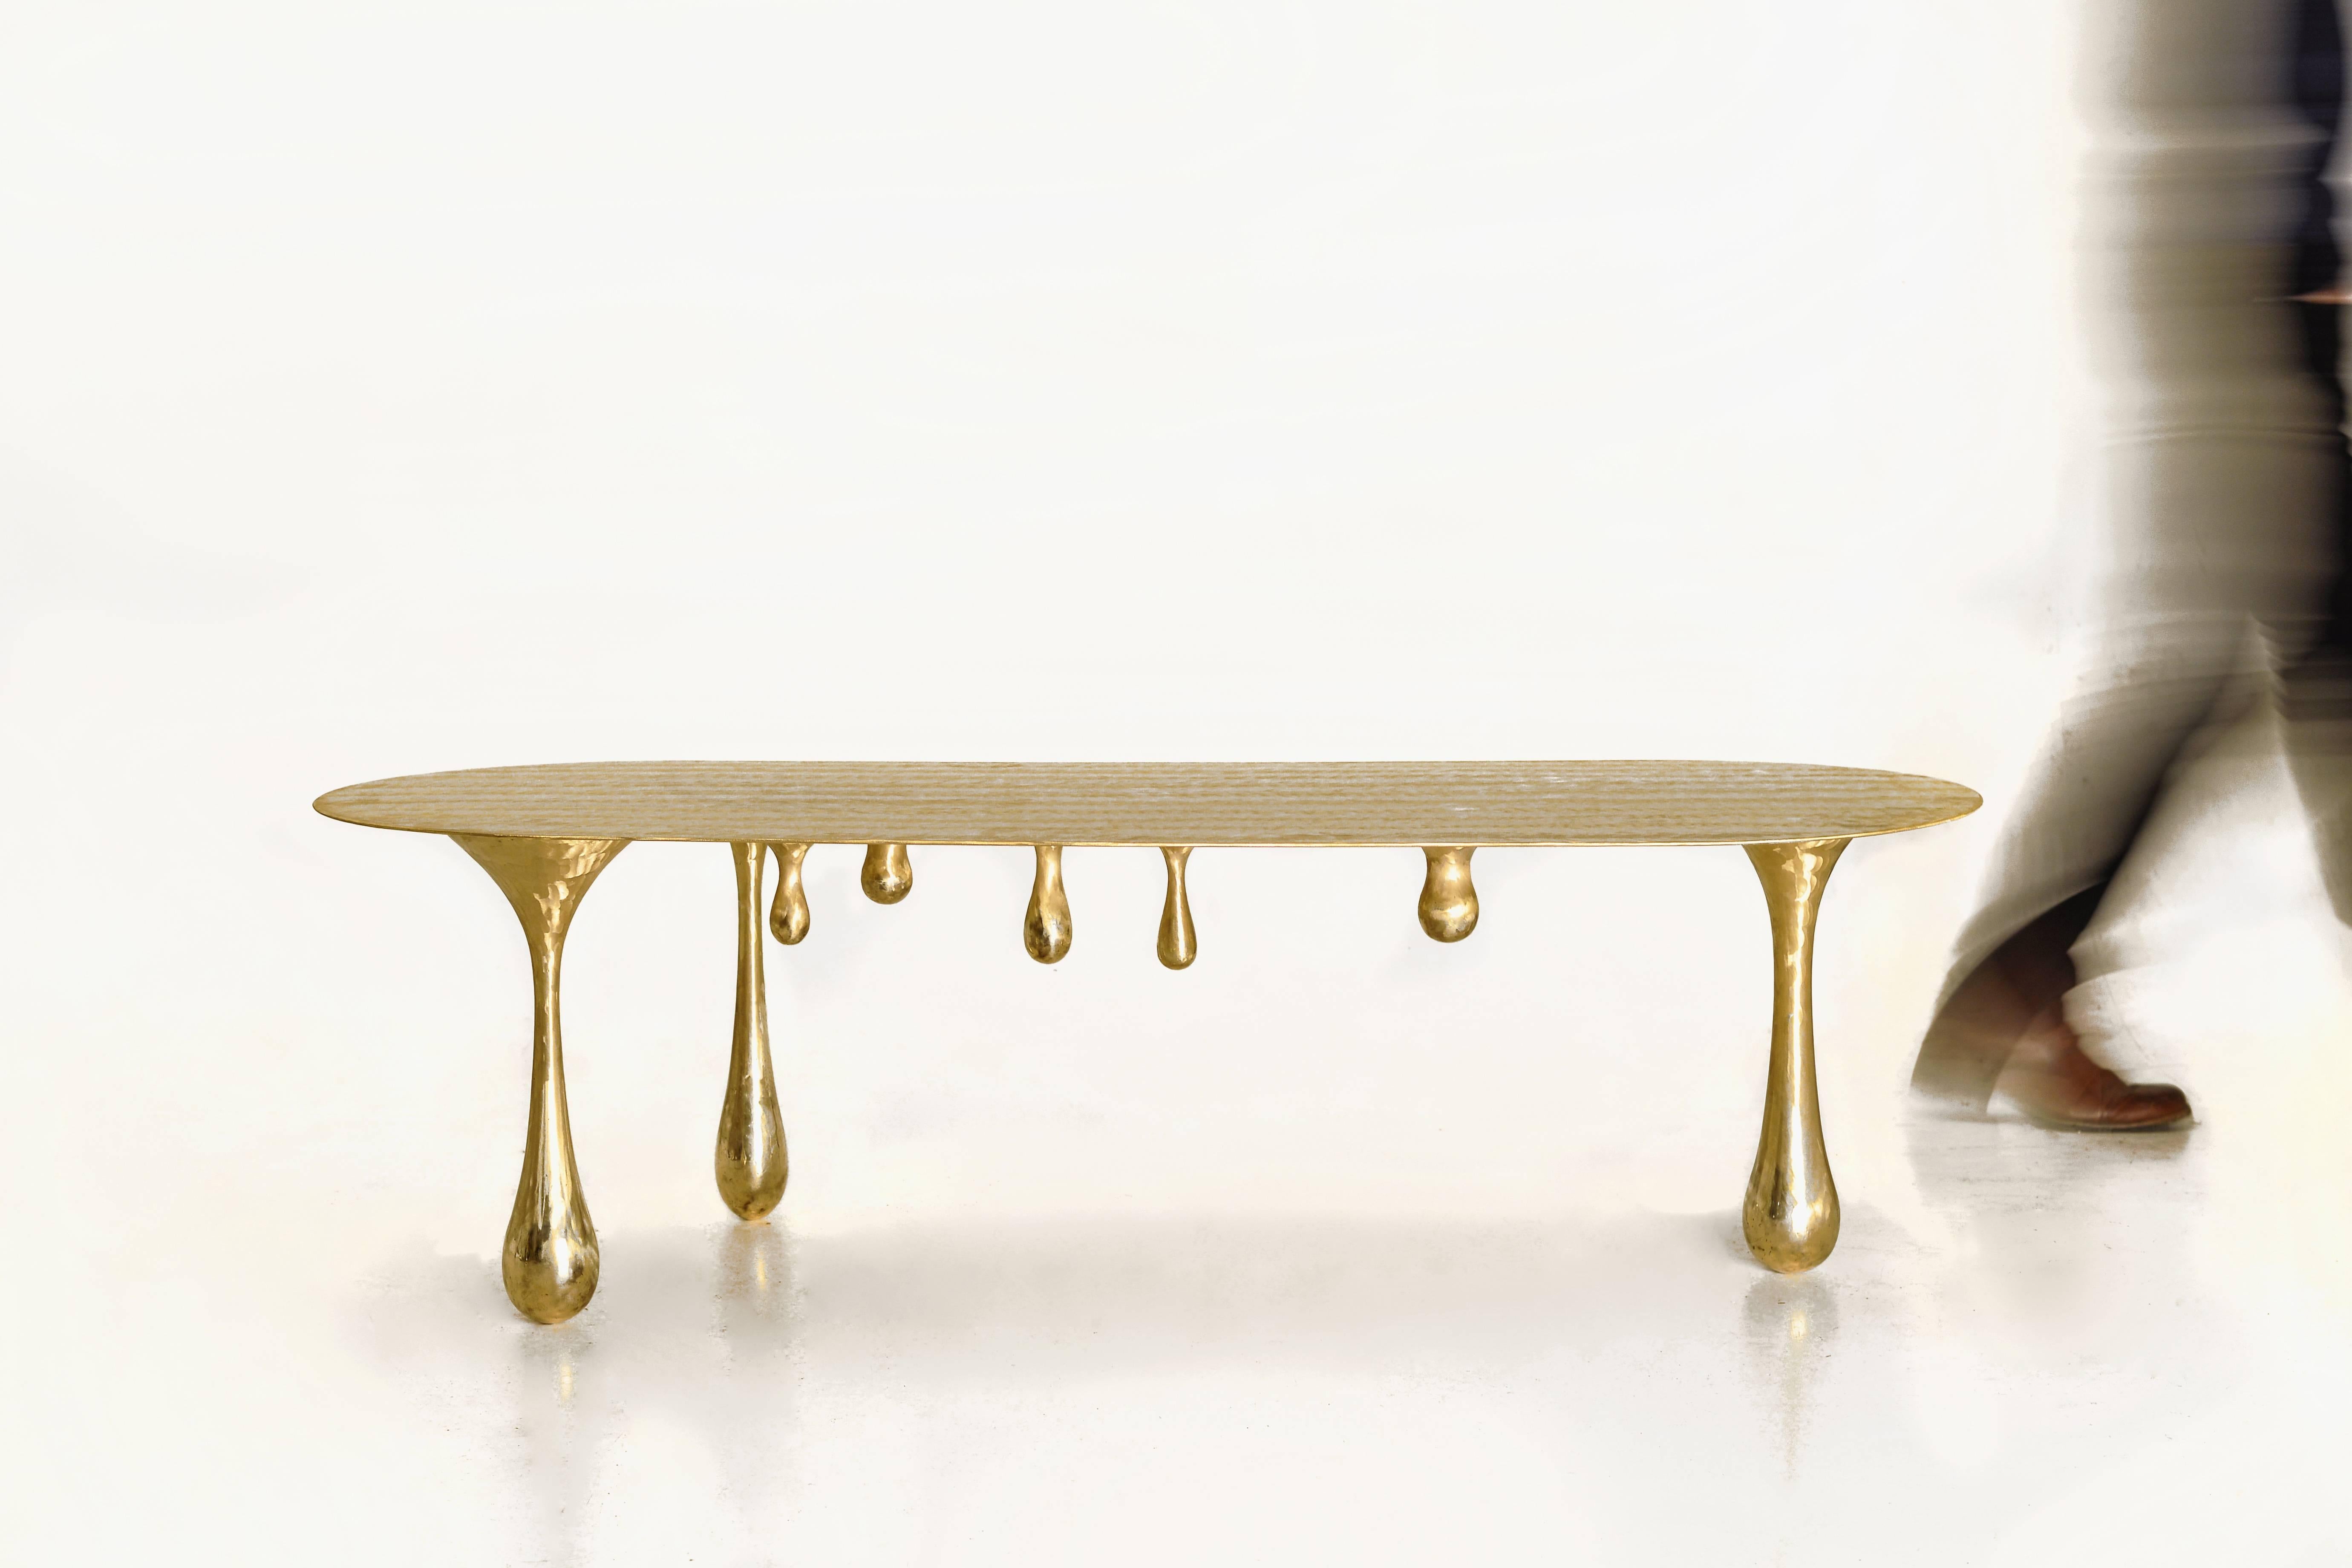 The table comes in 2 designs. The only difference is the table top, one is zigzag shape (images attached), the other one is oval flat surface.

Tan’s practice, since graduating from the China Academy of Art, has been focused on the ancient technique